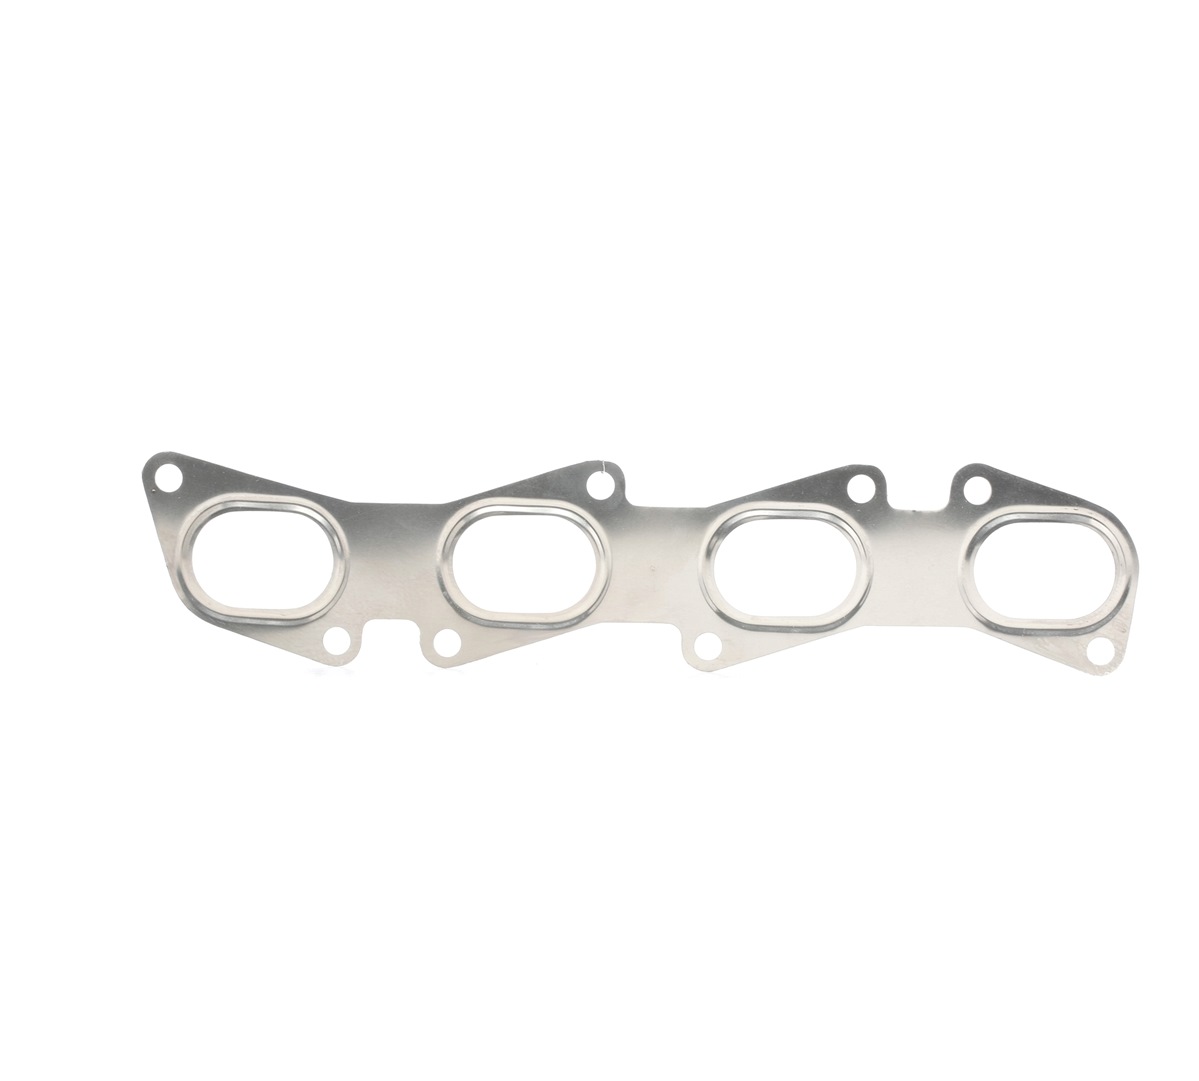 Buy Exhaust manifold gasket FA1 433-001 - Gaskets and sealing rings parts ALFA ROMEO 155 online